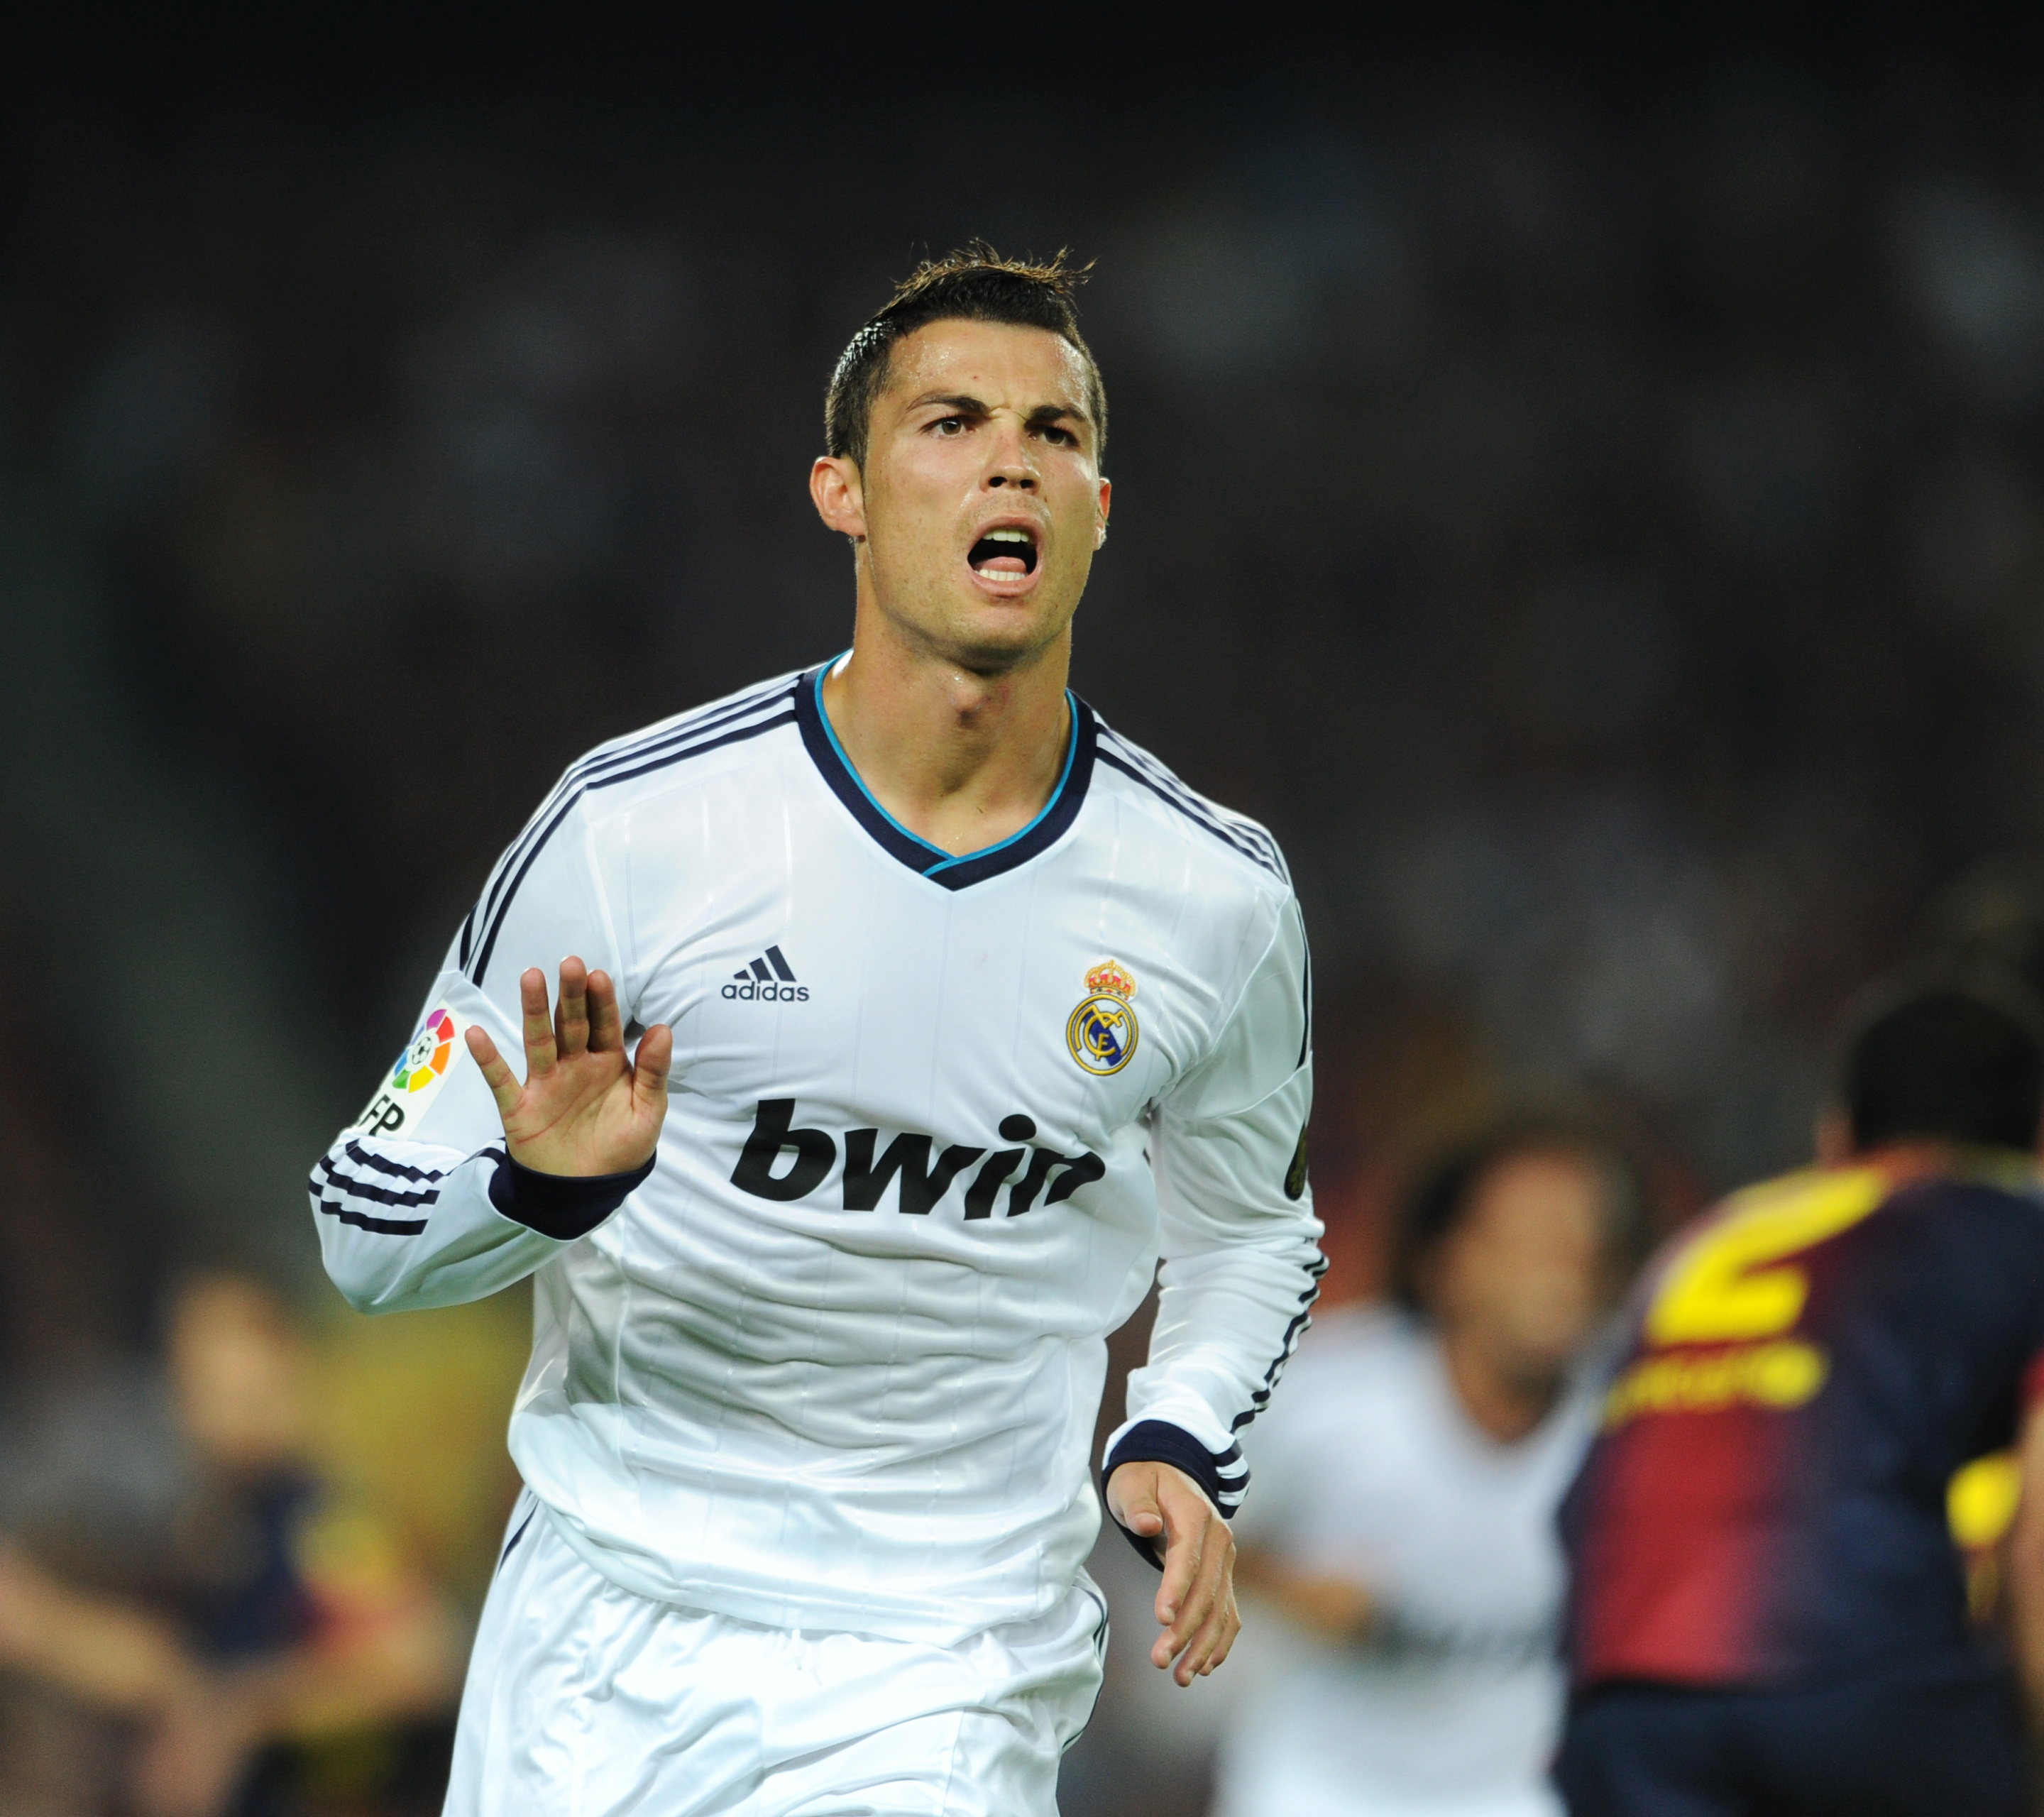 Cristiano Ronaldo Wallpapers For Mobile Phones-2 - Cristiano Ronaldo Real Madrid Hd - HD Wallpaper 